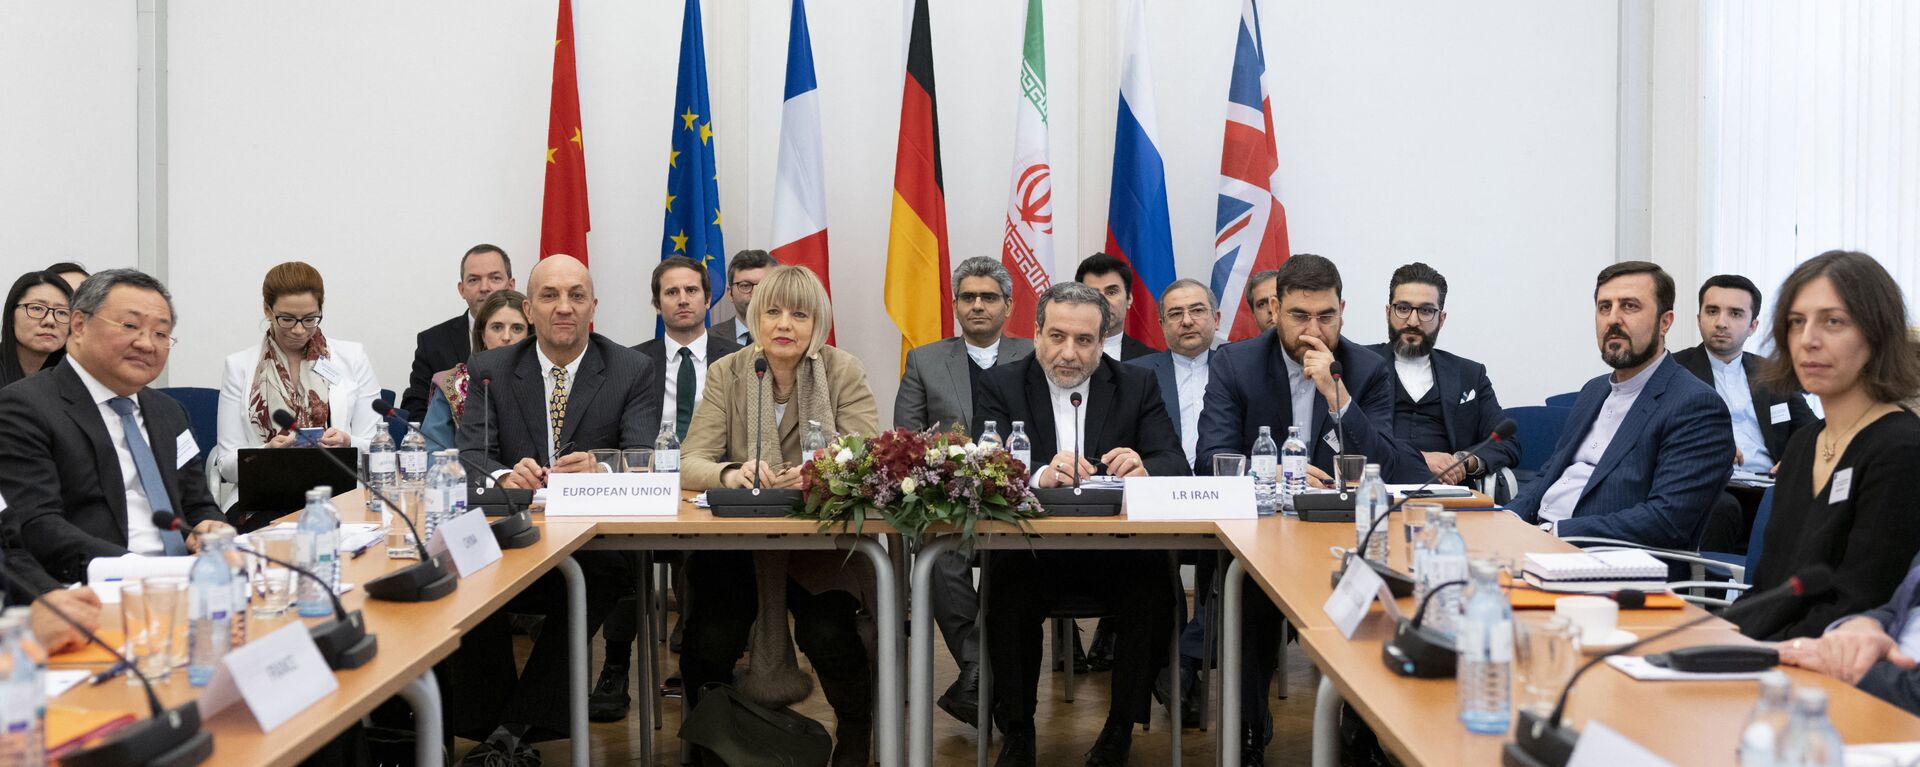 Iranian political deputy at the Ministry of Foreign Affairs of Iran Abbas Araghchi (C-R), and German Secretary General of the European External Action Service (EEAS) Helga Maria Schmid (C-L) attend a meeting of the Joint Commission on Iran's nuclear program (JCPOA) at EU Delegation to the International Organizations office in Vienna, Austria, on December 6, 2019. (Photo by JOE KLAMAR / AFP) - Sputnik International, 1920, 24.08.2022